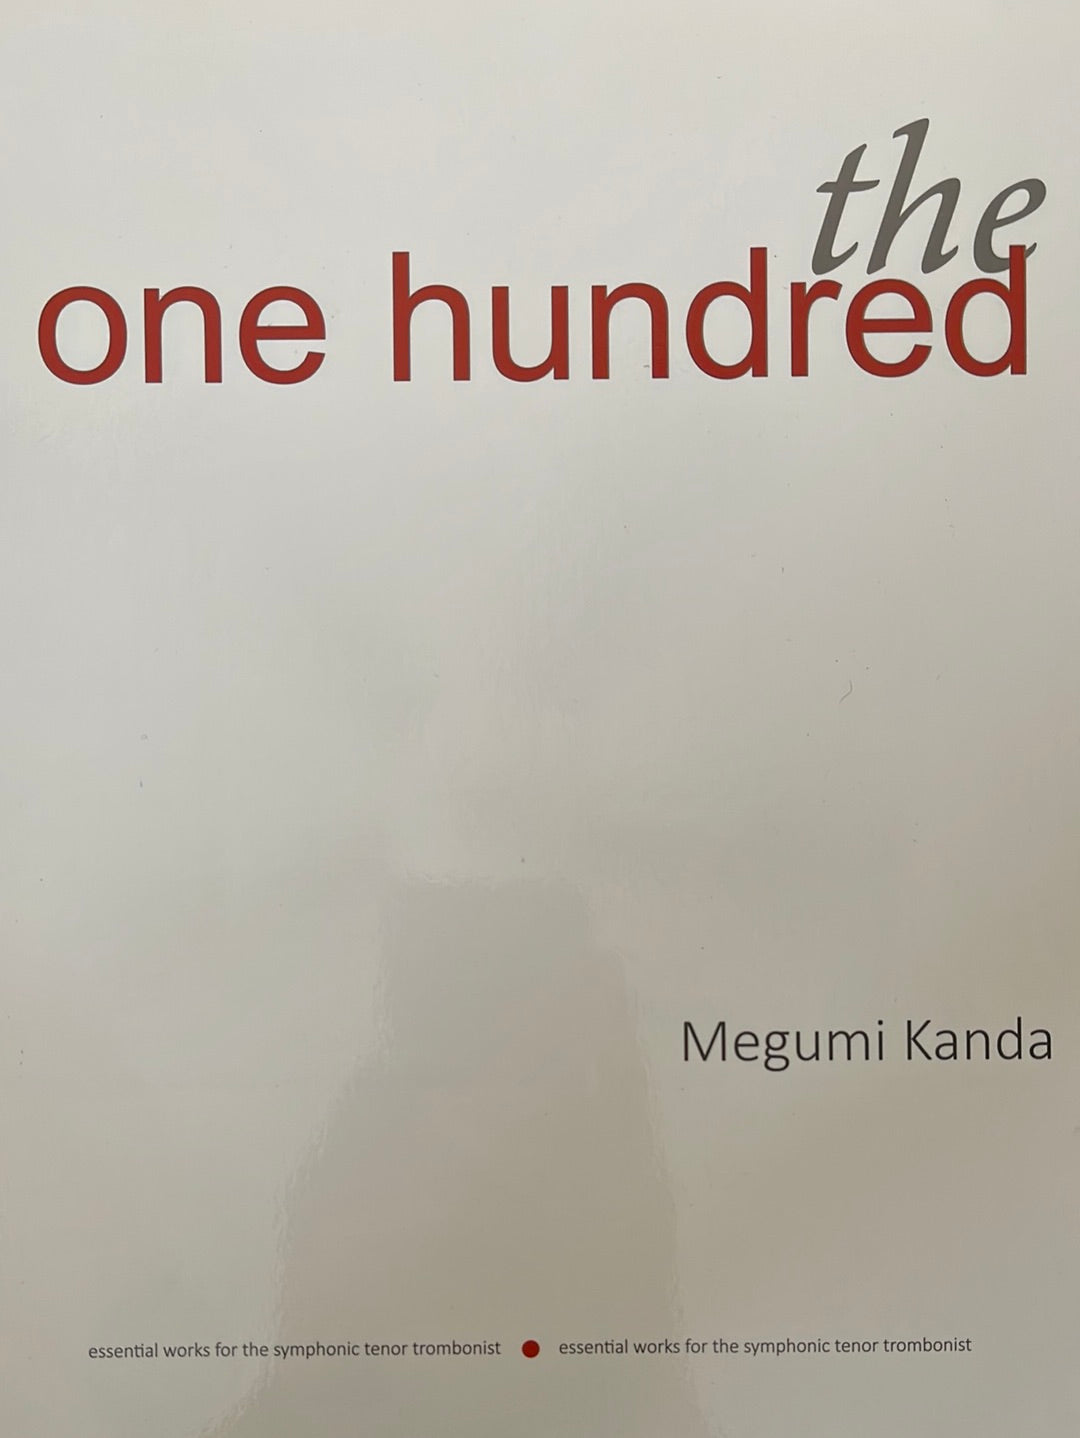 Kanda, Megumi - the one hundred - essential works for the symphonic tenor trombonist